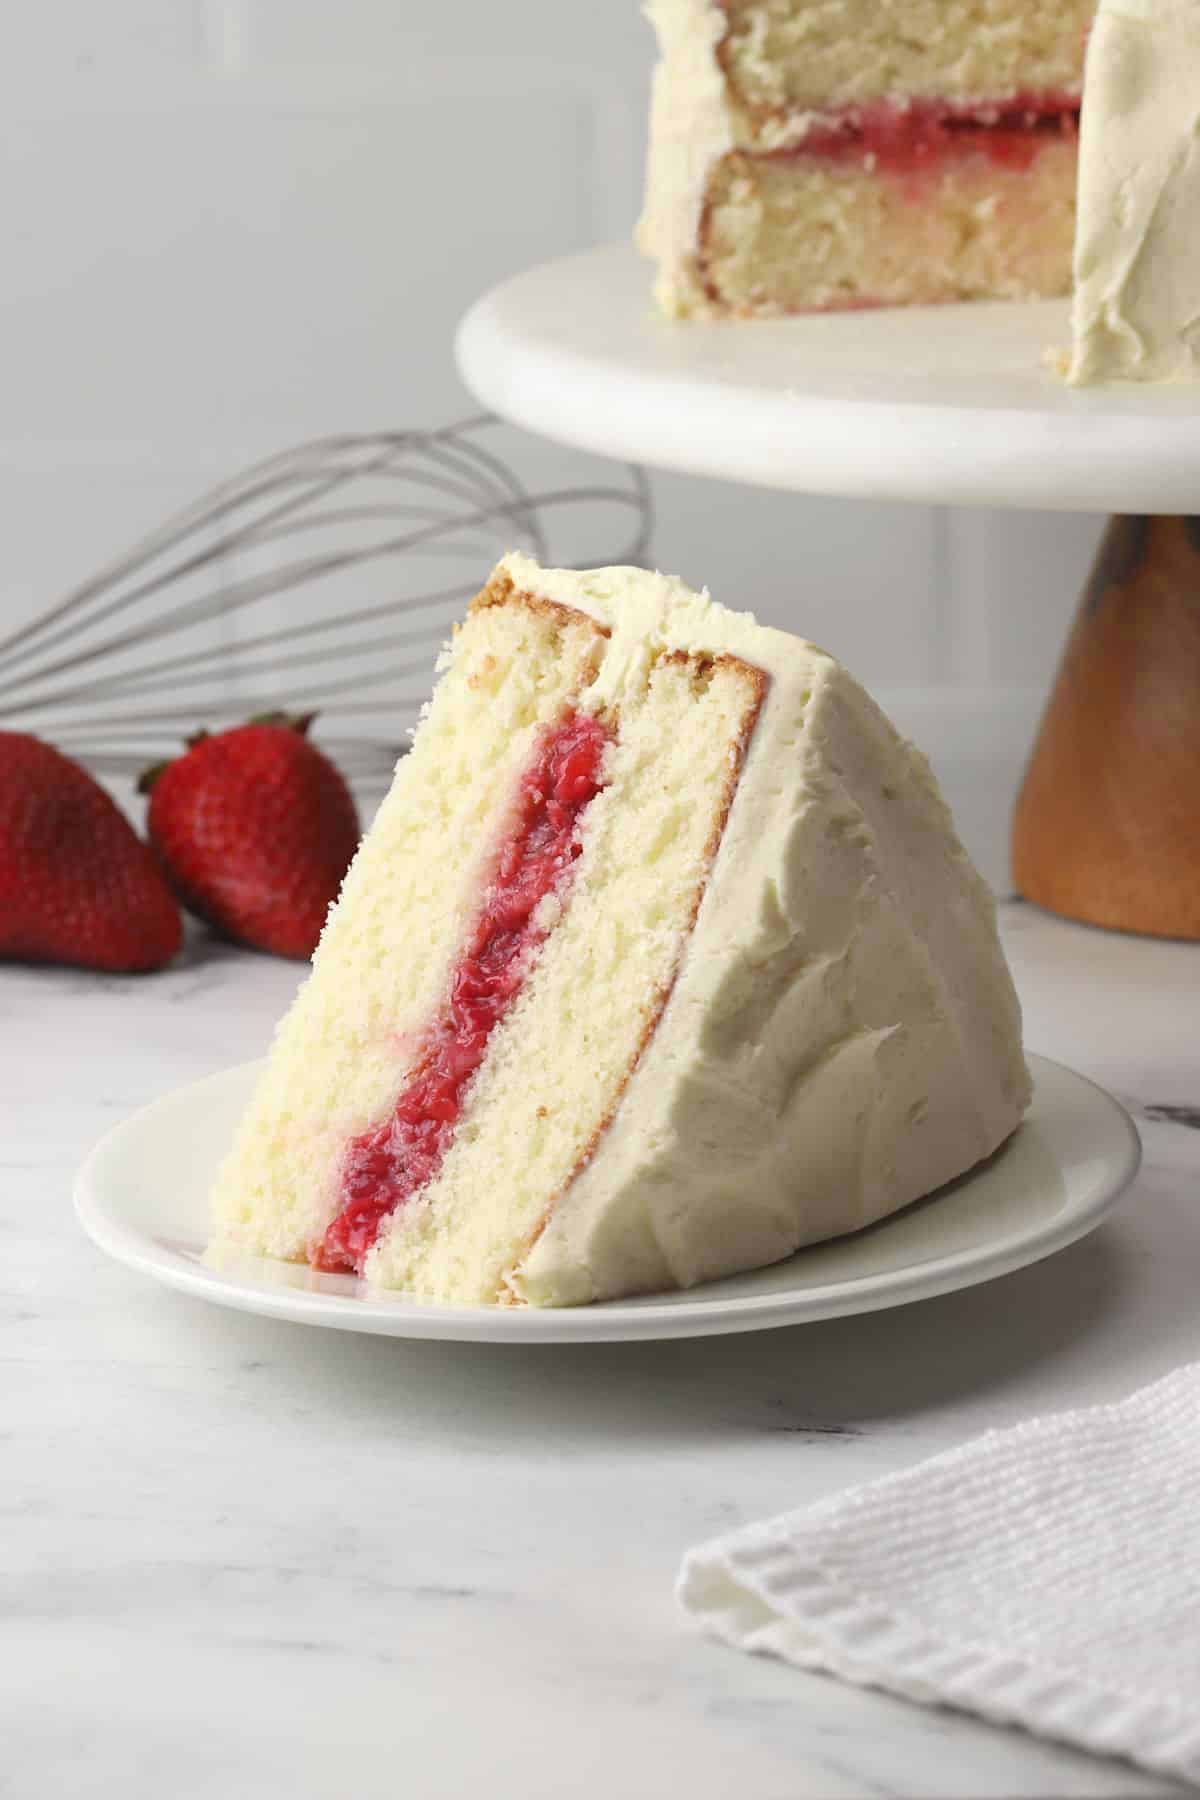 A slice of strawberry filled white cake on a white plate.